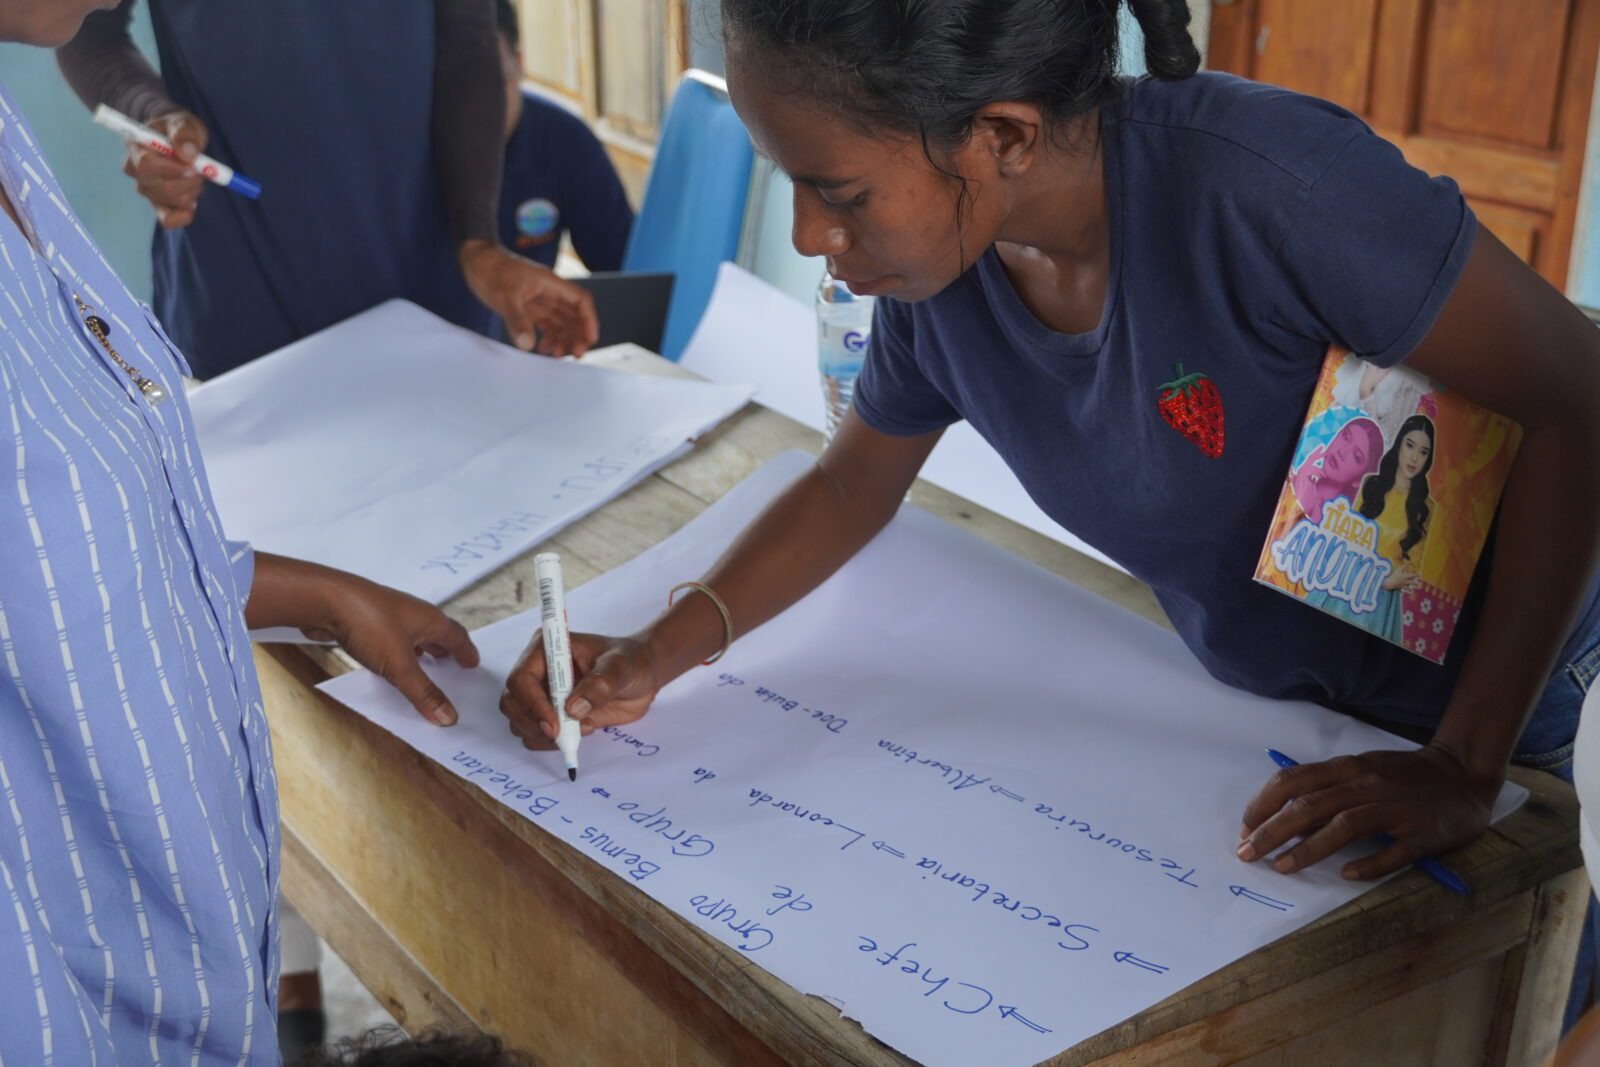 A member of a savings and loan group from Ilimanu drafting the group’s constitution